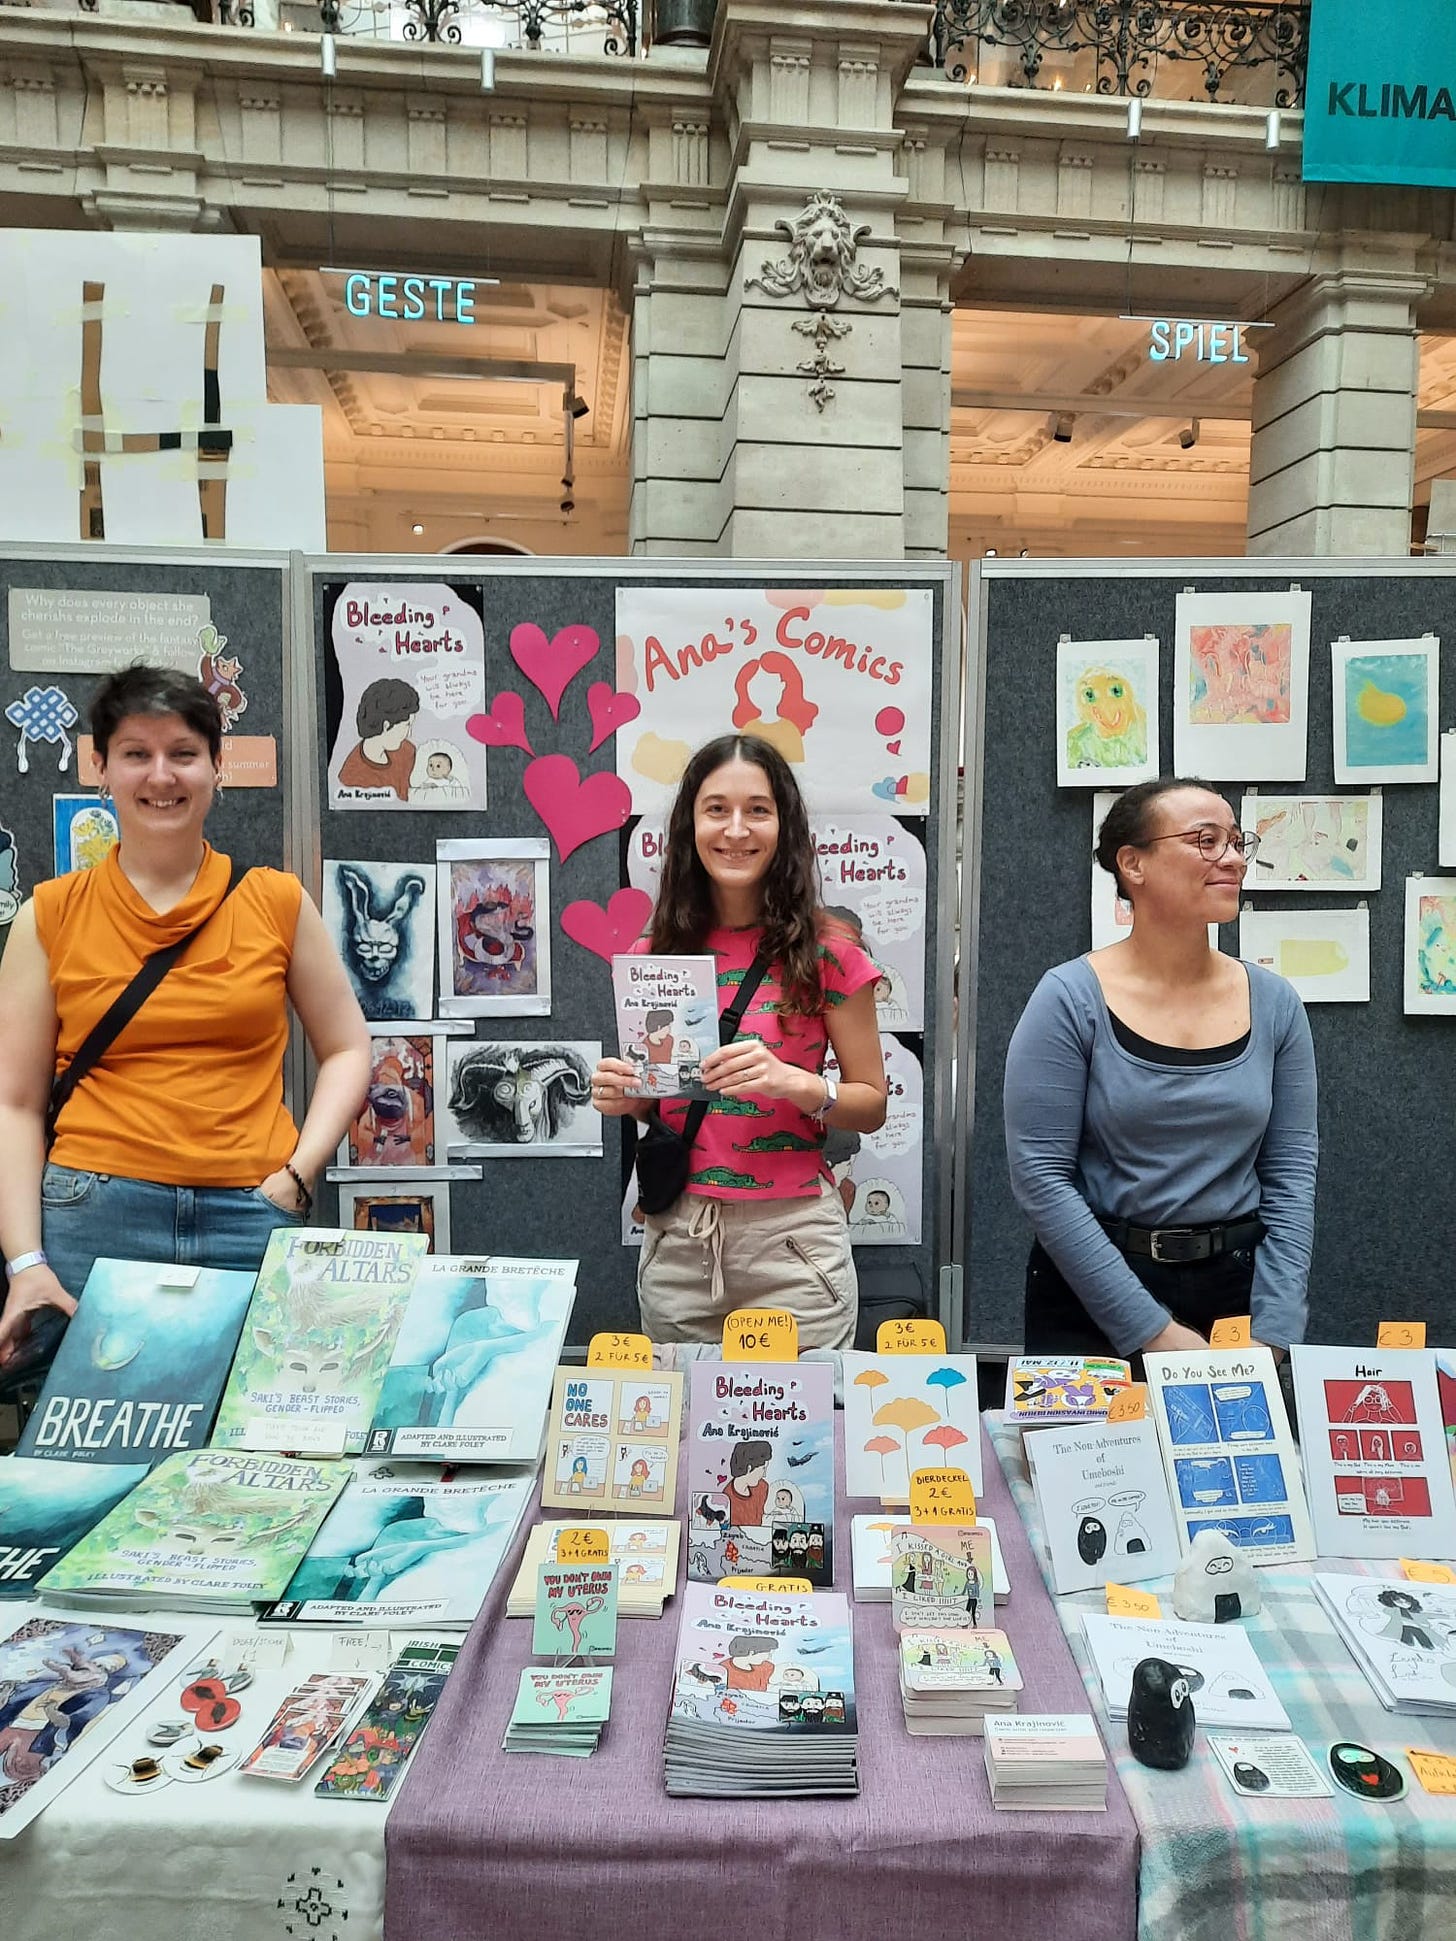 The photo shows a comic convention with three participants standing behind their tables. I am in the middle holding my comic "Bleeding hearts".